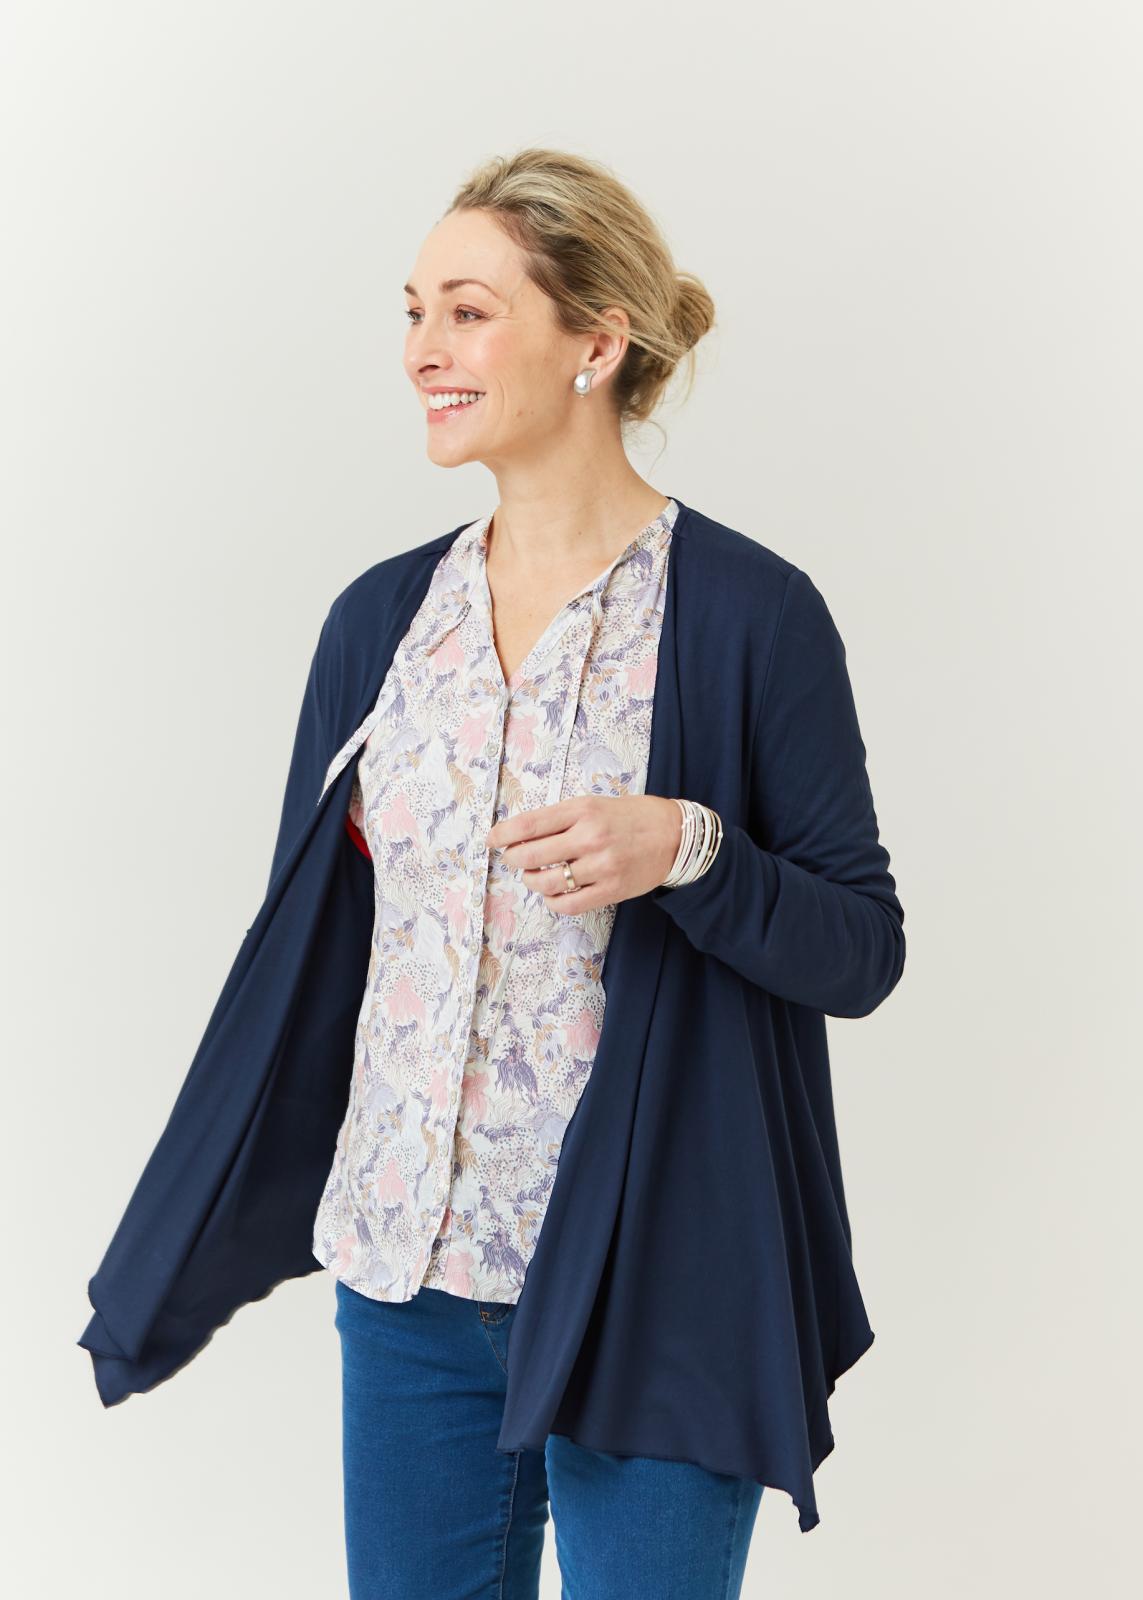 The Able Label - beautiful clothes, easier to dress | lady.co.uk